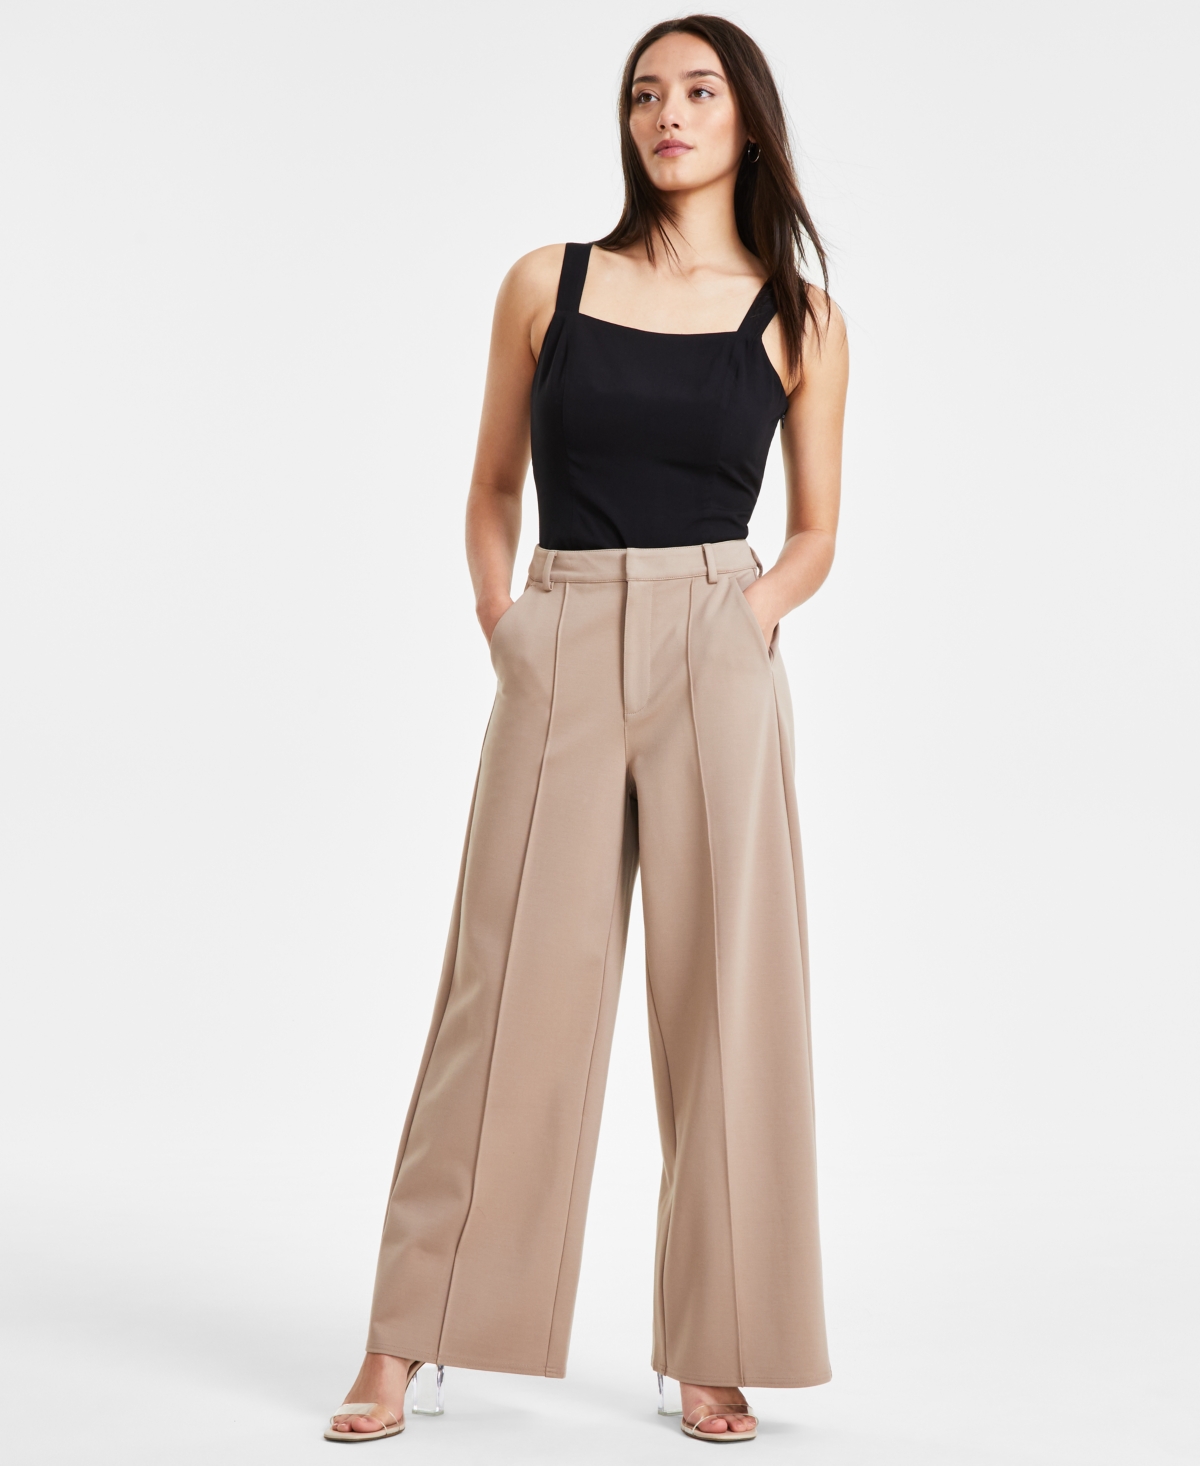 Petite Seamed Wide-Leg Ponte Pants, Created for Macy's - Warm Ginger